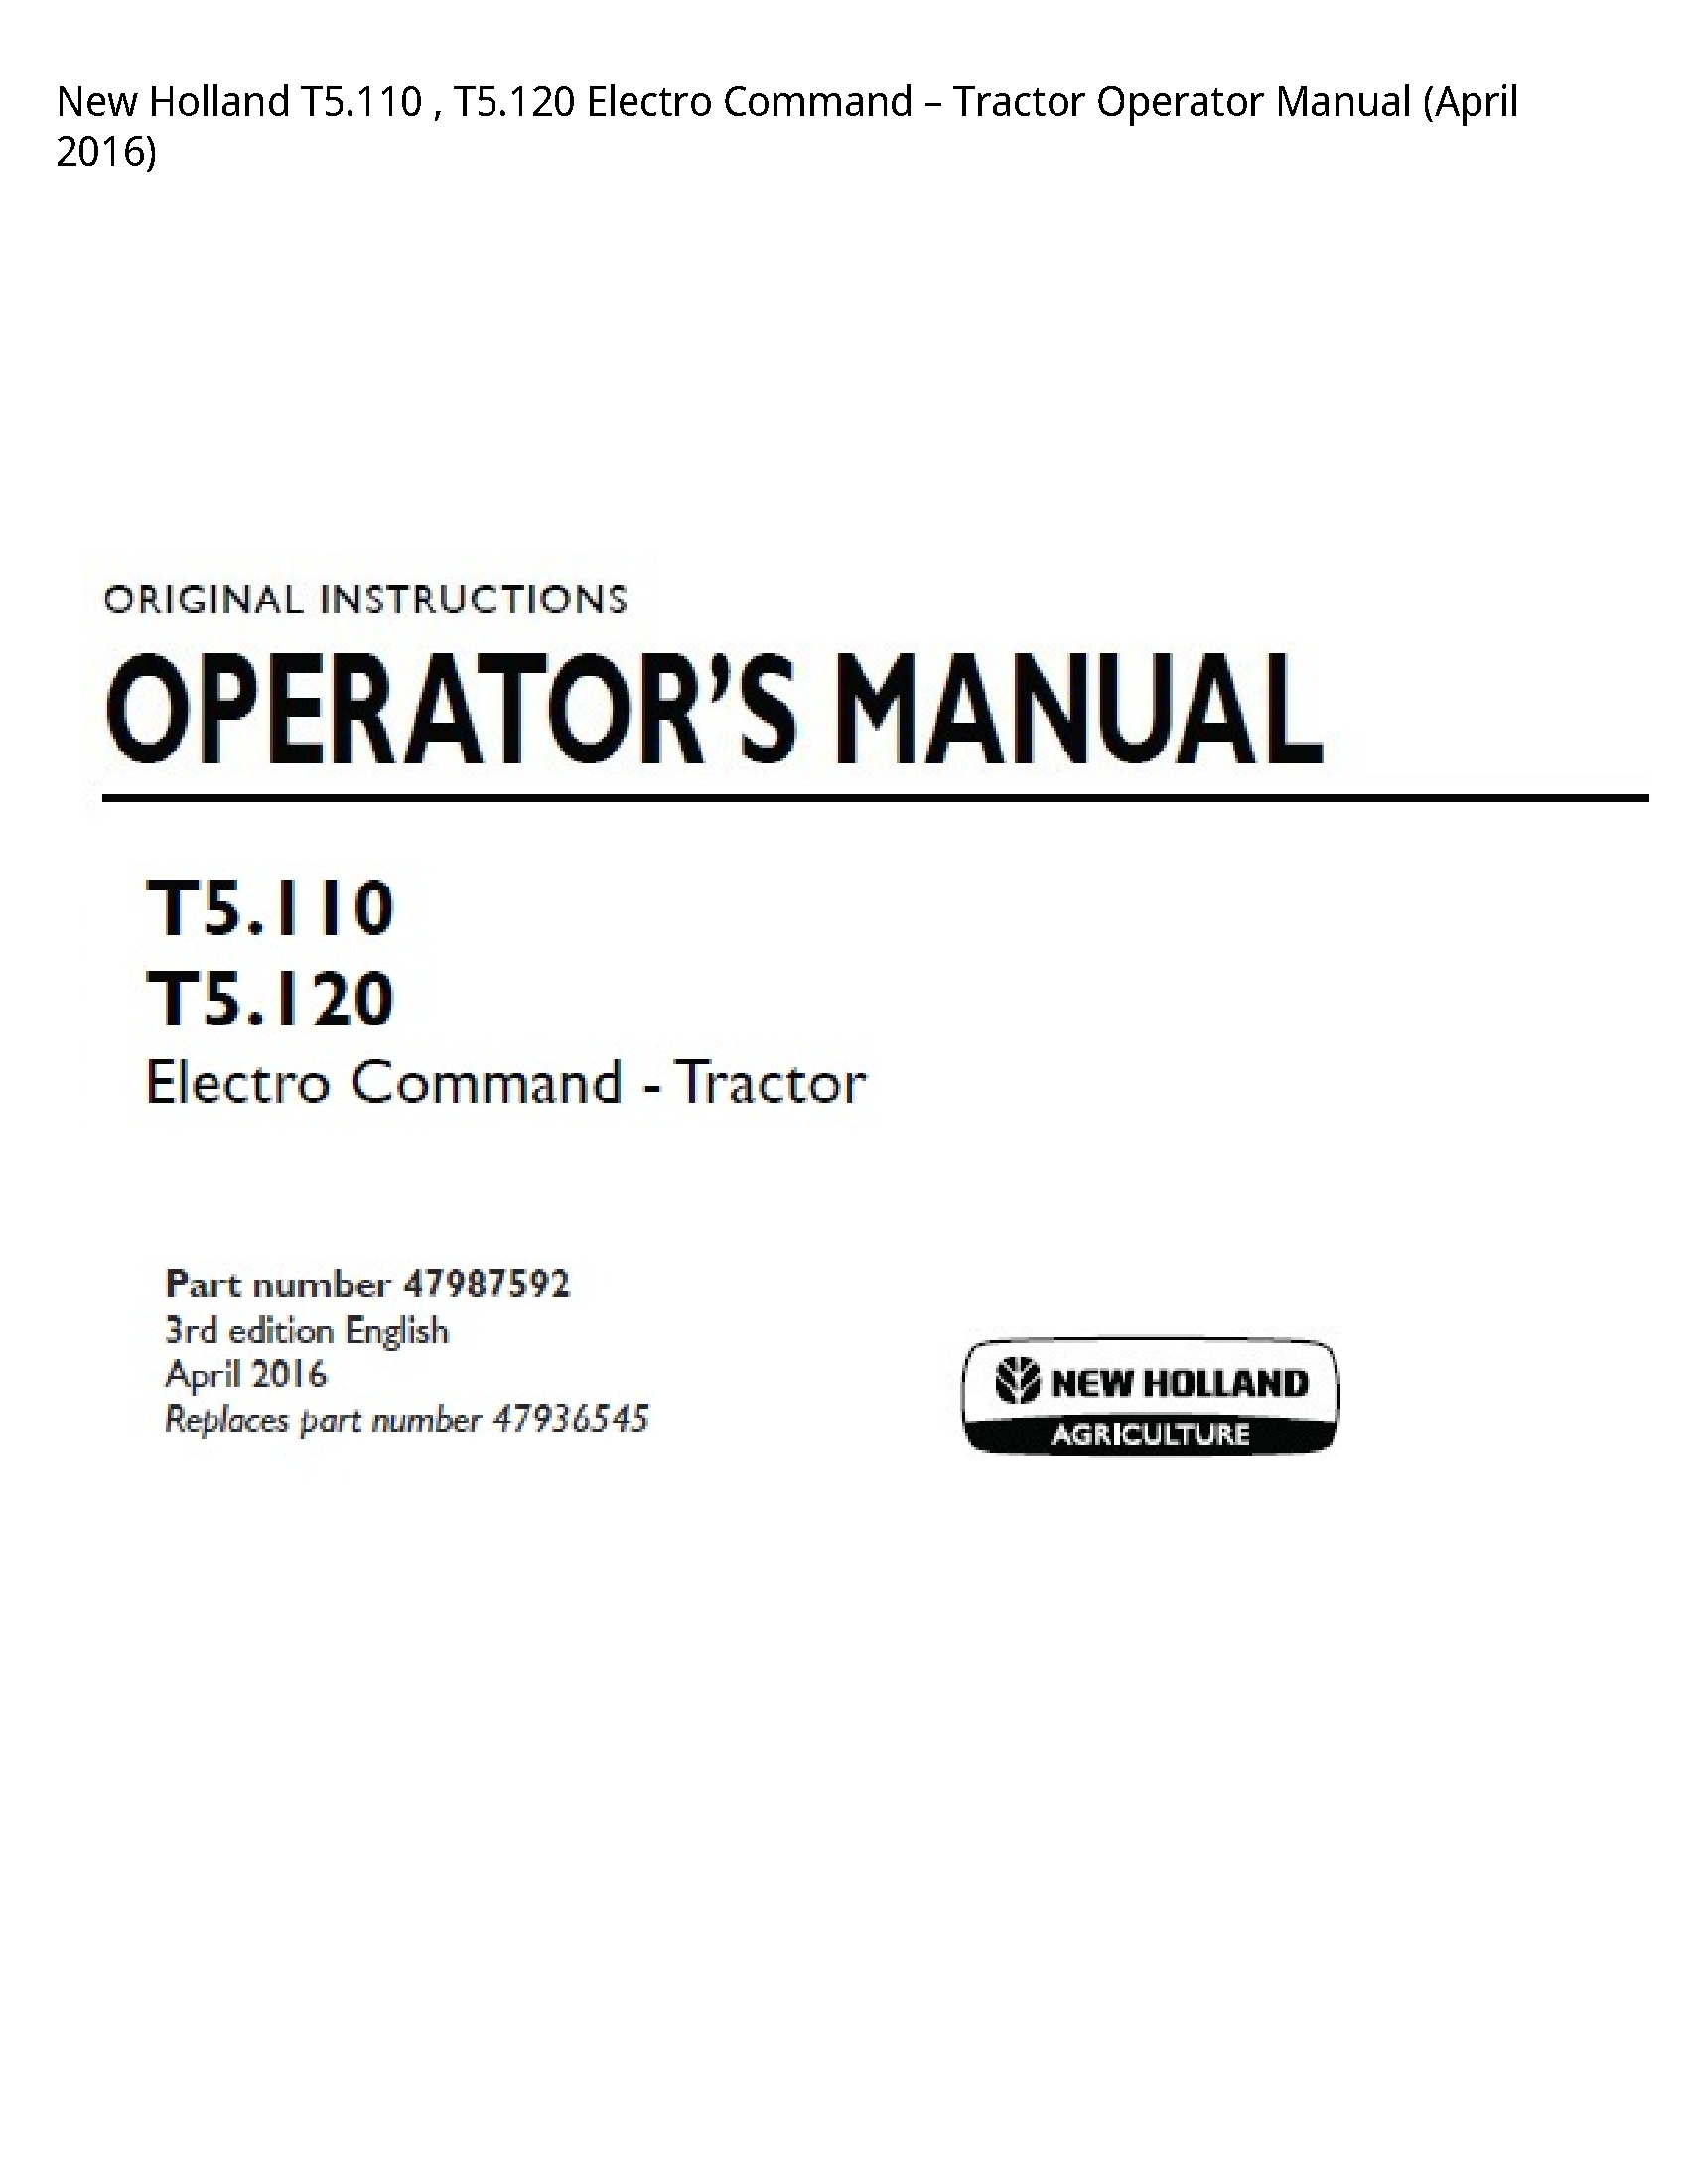 New Holland T5.110 Electro Command Tractor Operator manual